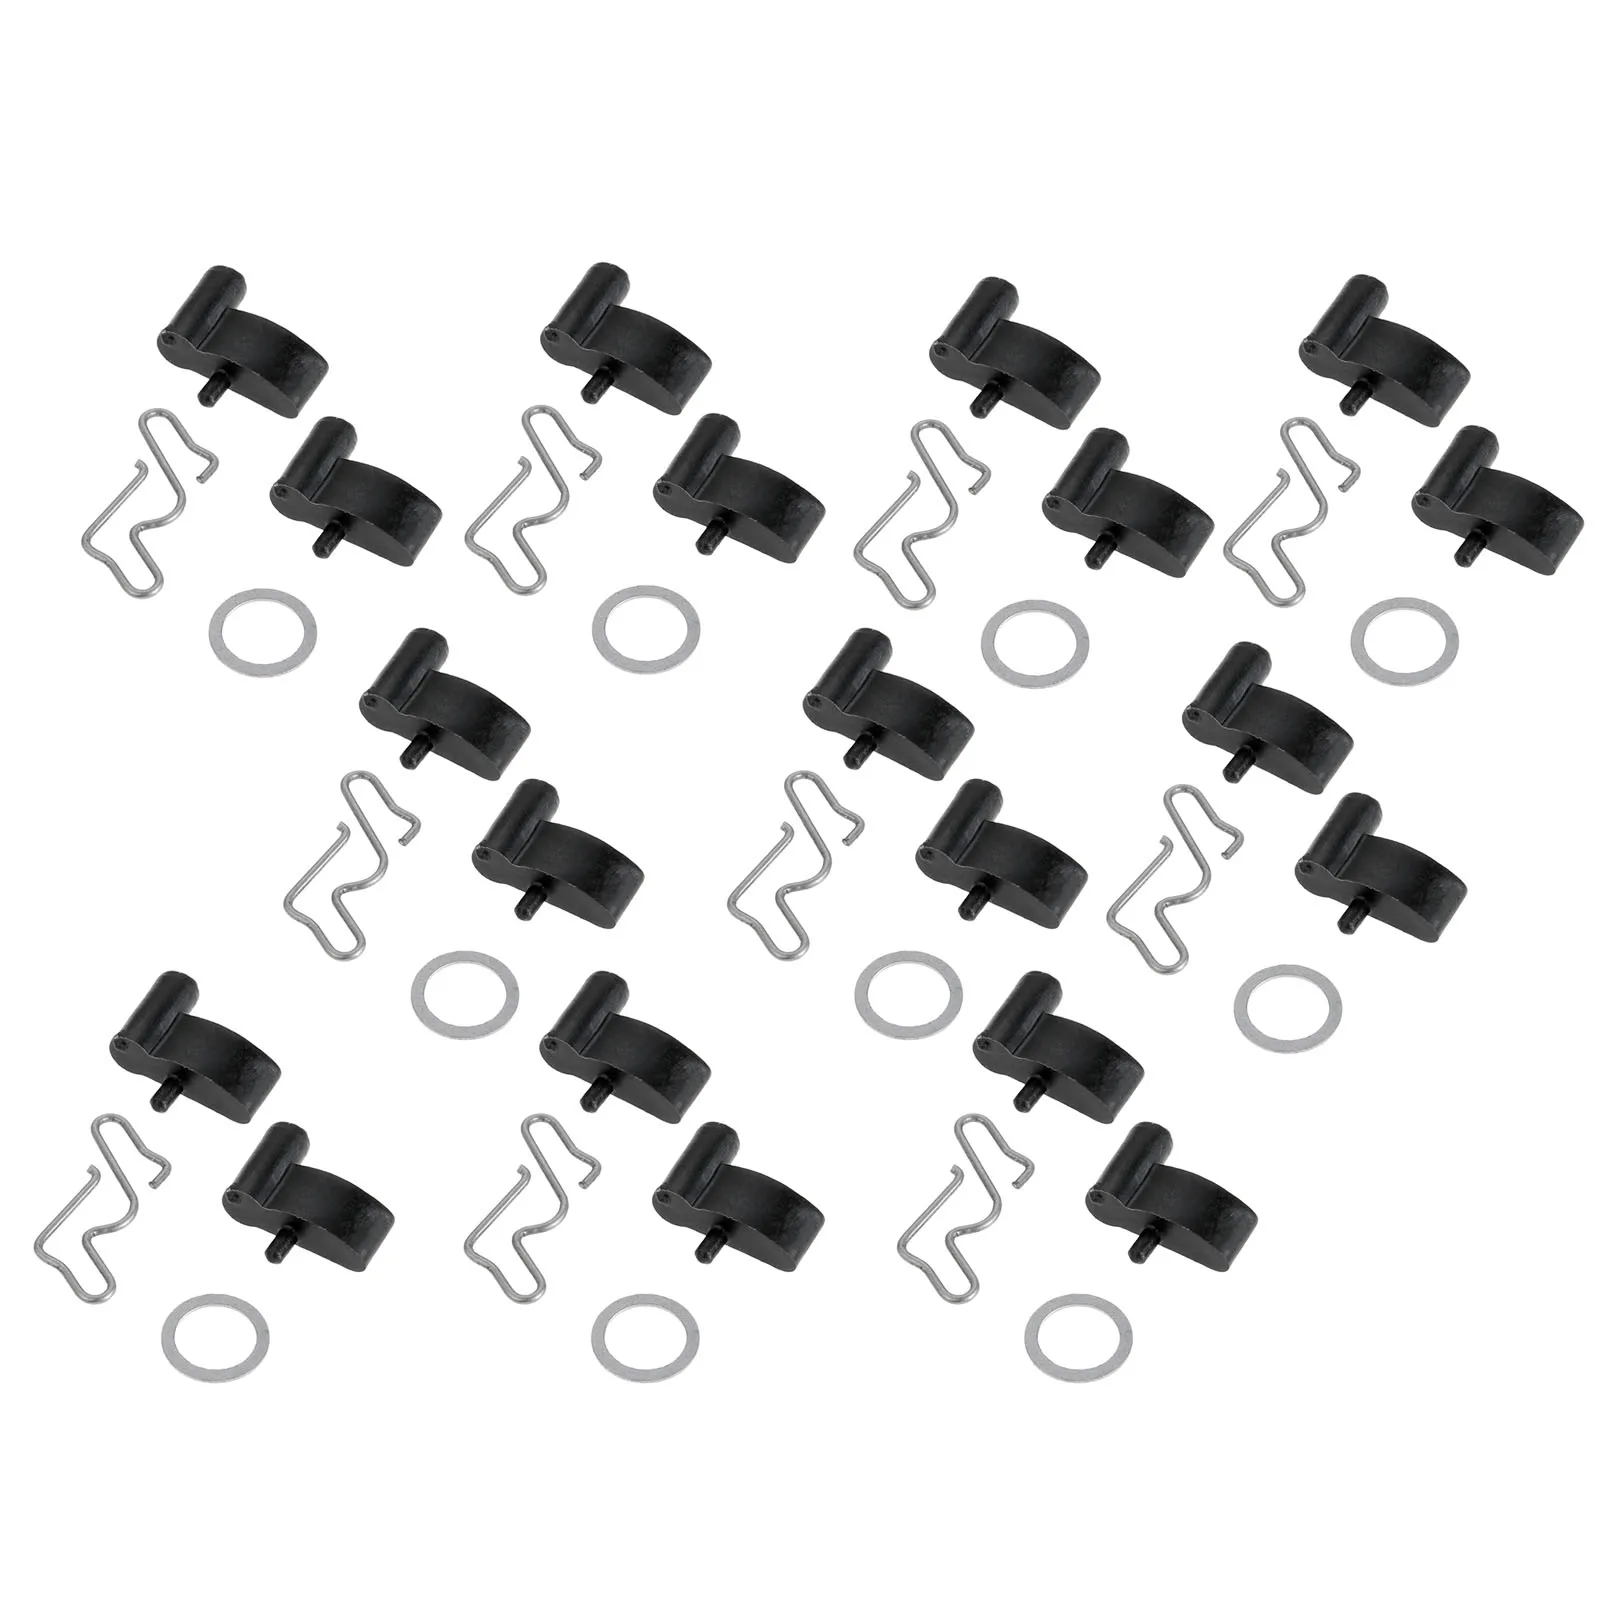 

10 Sets Chainsaw Recoil Starter Pawl Spring Washer Repair Kit Fits for STIHL 017 018 021 023 025 MS170 MS180 MS230 MS210 MS250